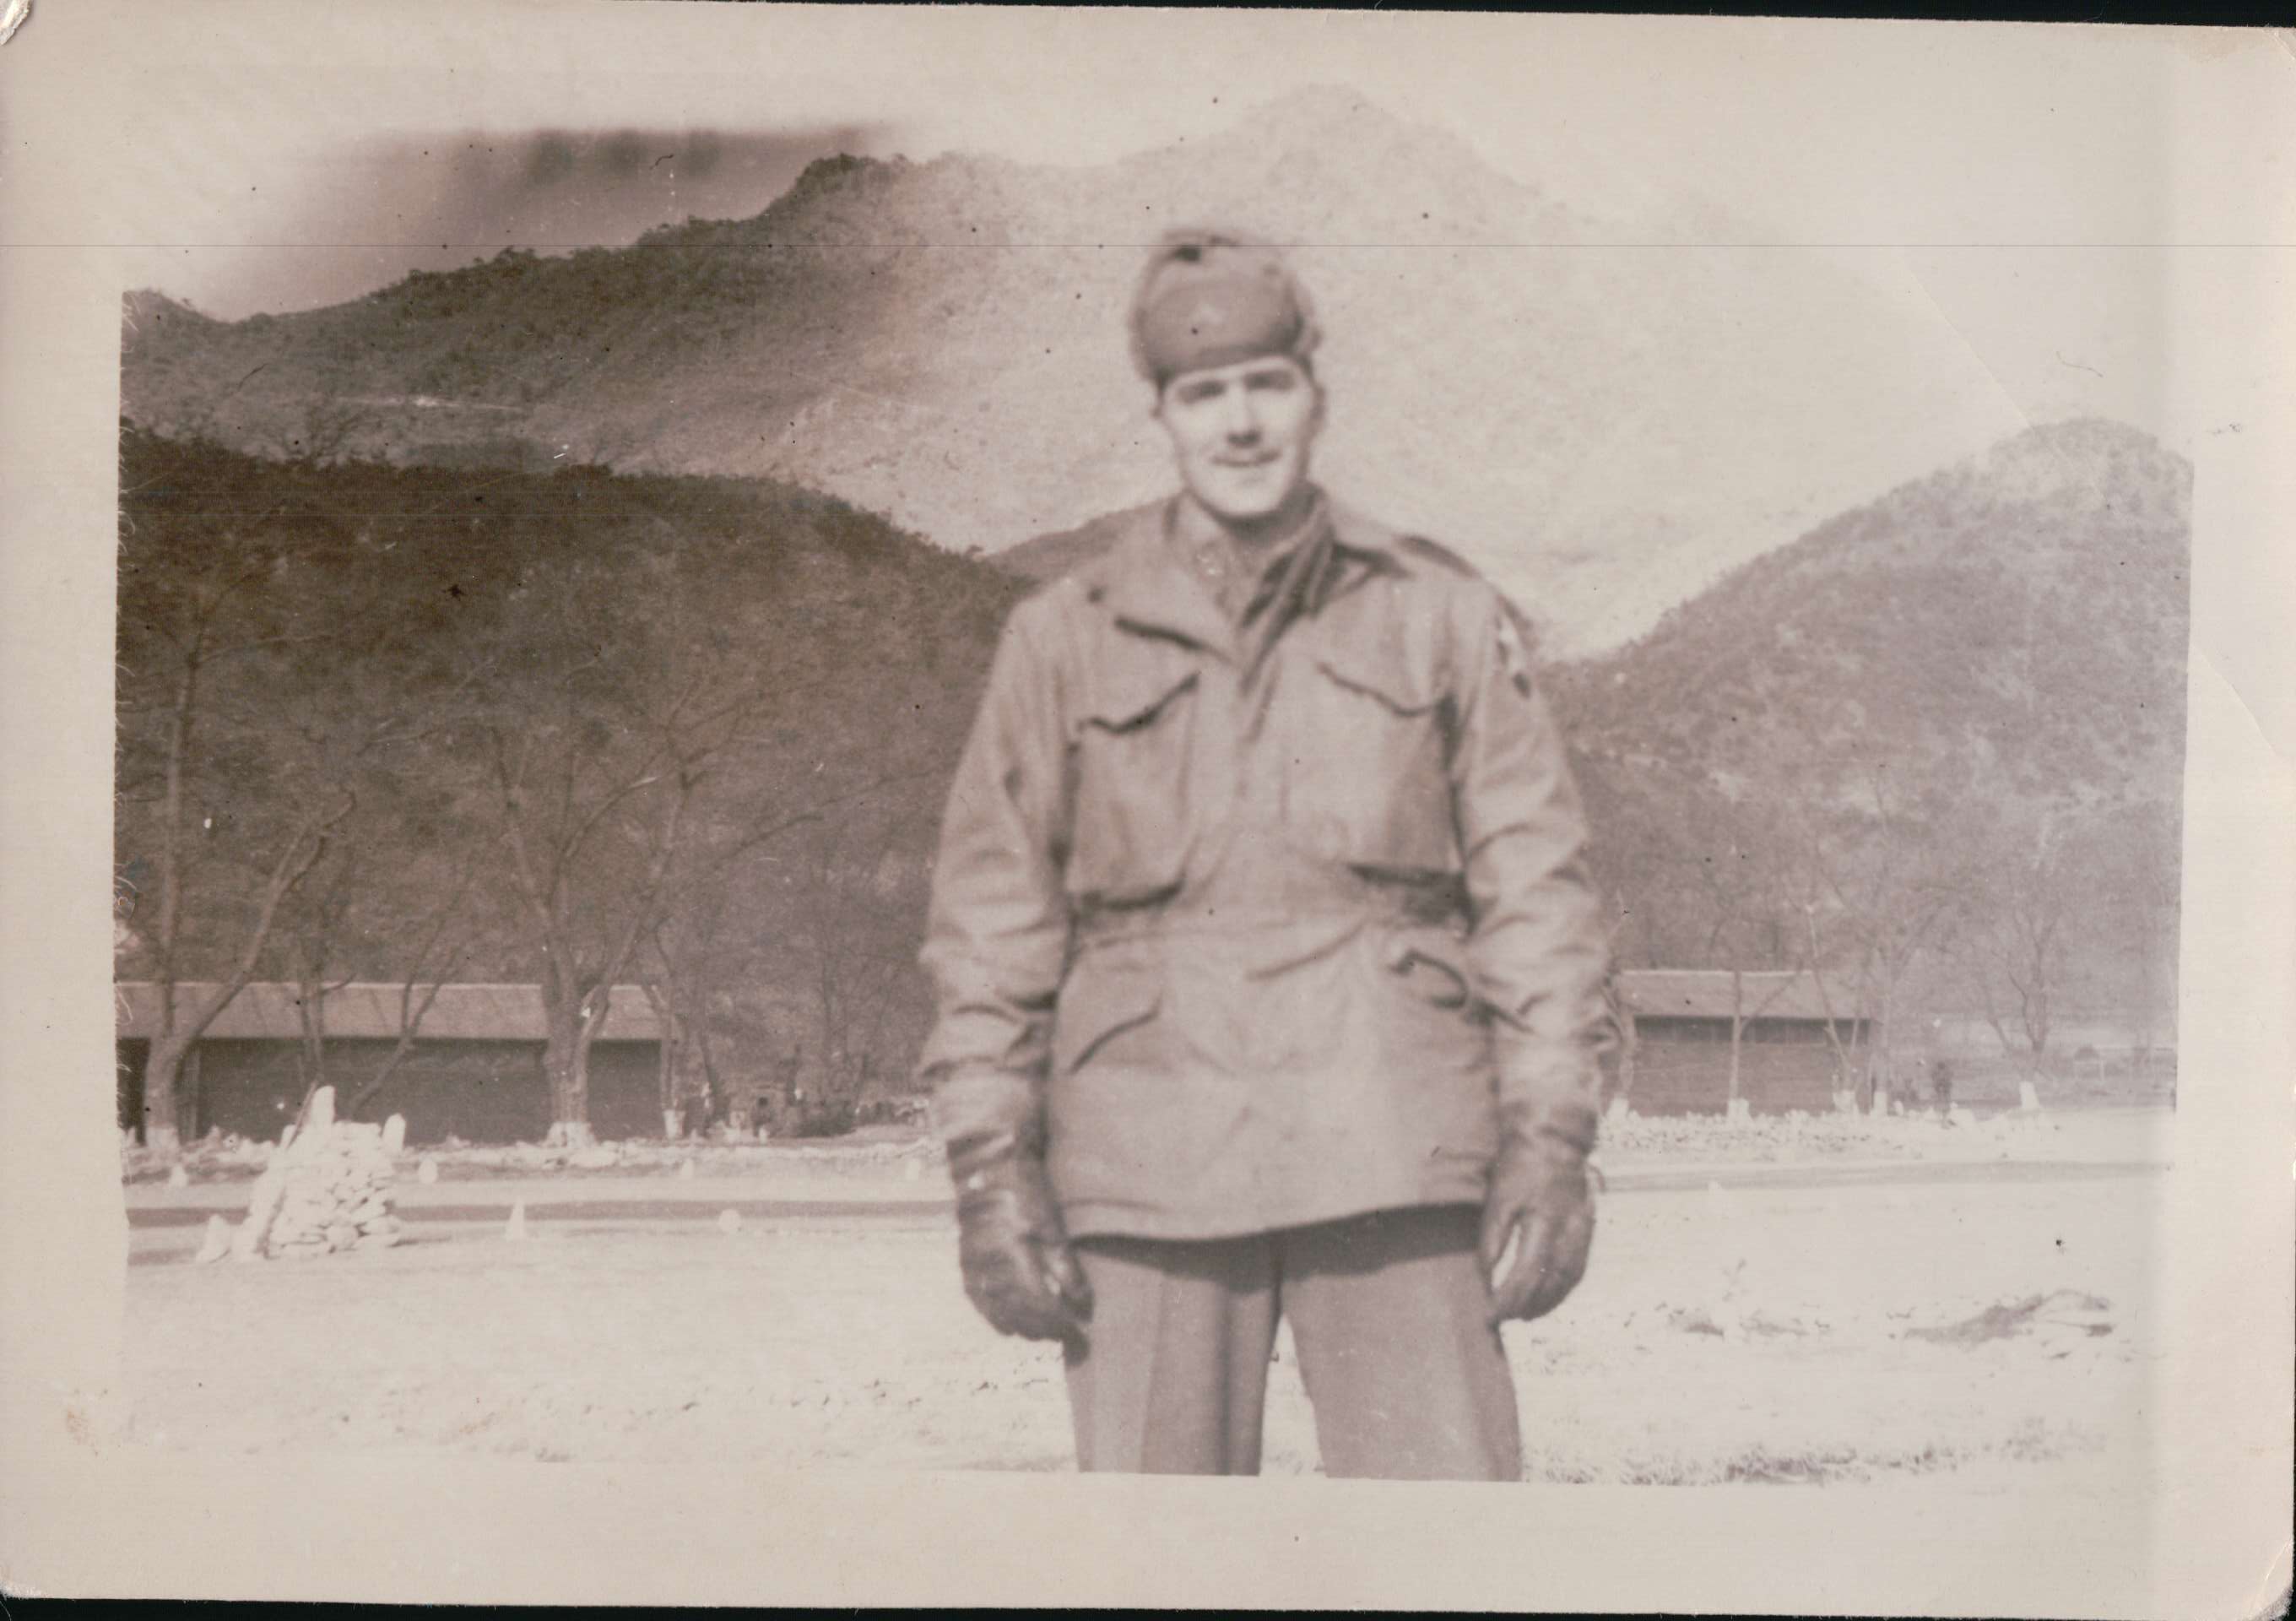 James Fountain at Kimpo Airfield